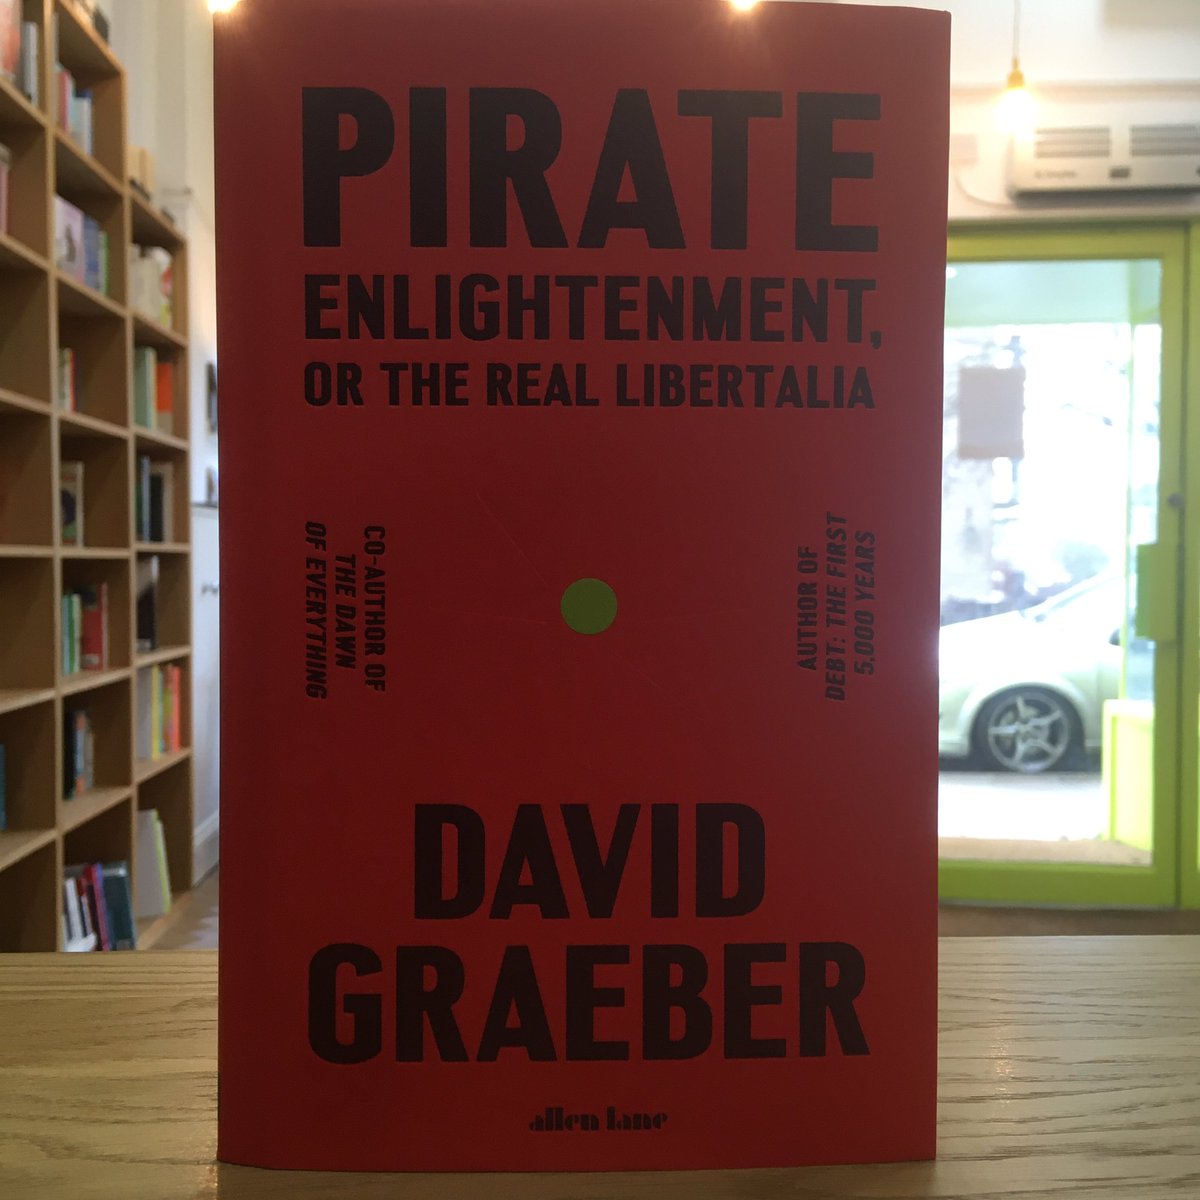 The late, great David Graeber takes on the established view (again) of the enlightenment in this fascinating book. Provocative and piratical as ever.